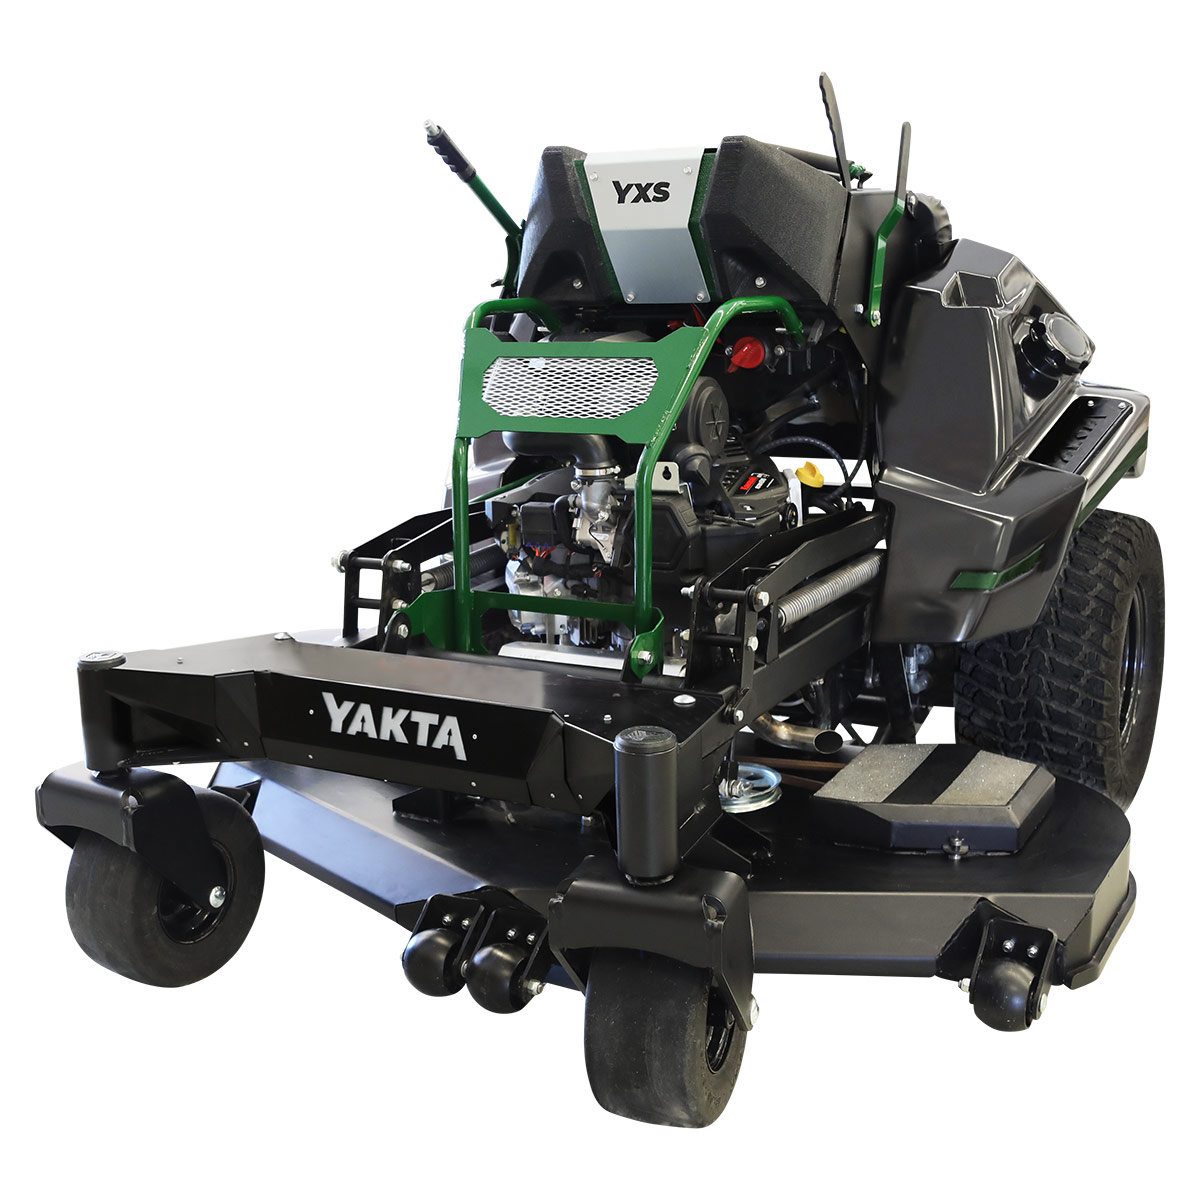 YXS 710 stand-on mower front